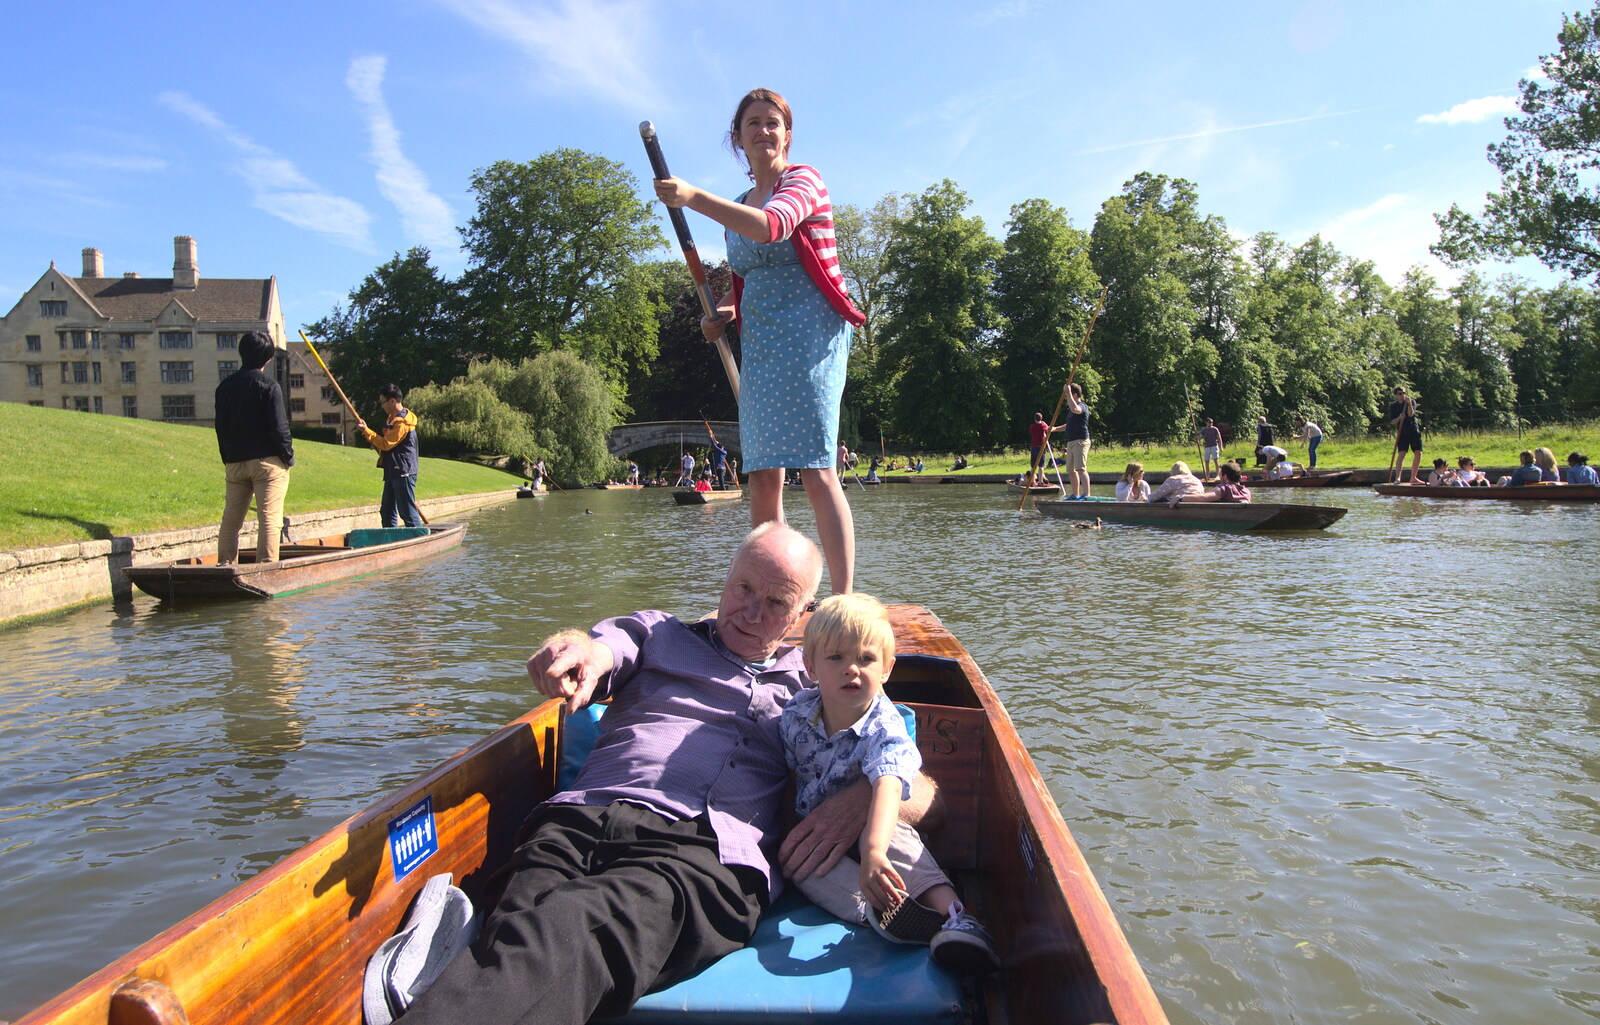 Isobel punts as Grandad and Harry look around from Punting With Grandad, Cambridge, Cambridgeshire - 6th June 2015